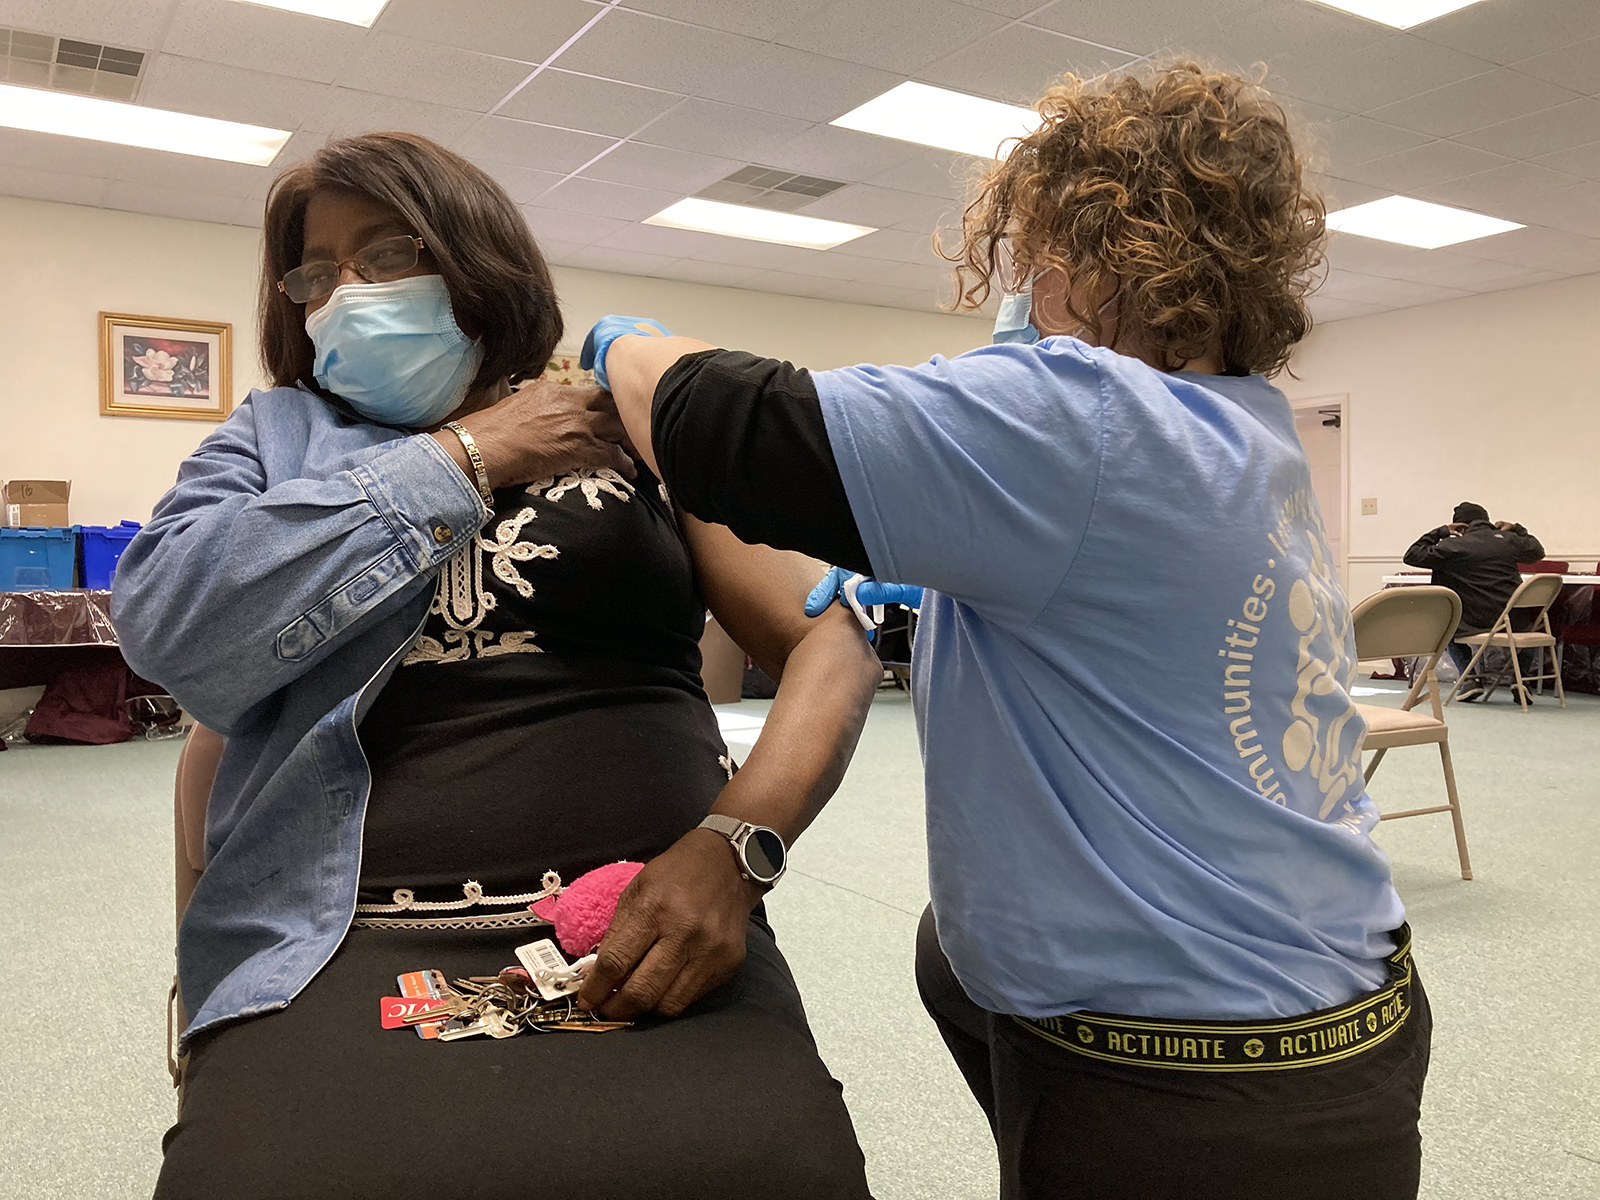 Nurse practitioner Monika Trogdon, right, gives a Moderna COVID-19 vaccination shot to Louella Neal, the pastor's wife, at a mobile vaccination clinic at Temple of Praise Church of Deliverance in Kenly, North Carolina, on on Wednesday, Feb. 17, 2021. RNS photo by Yonat Shimron